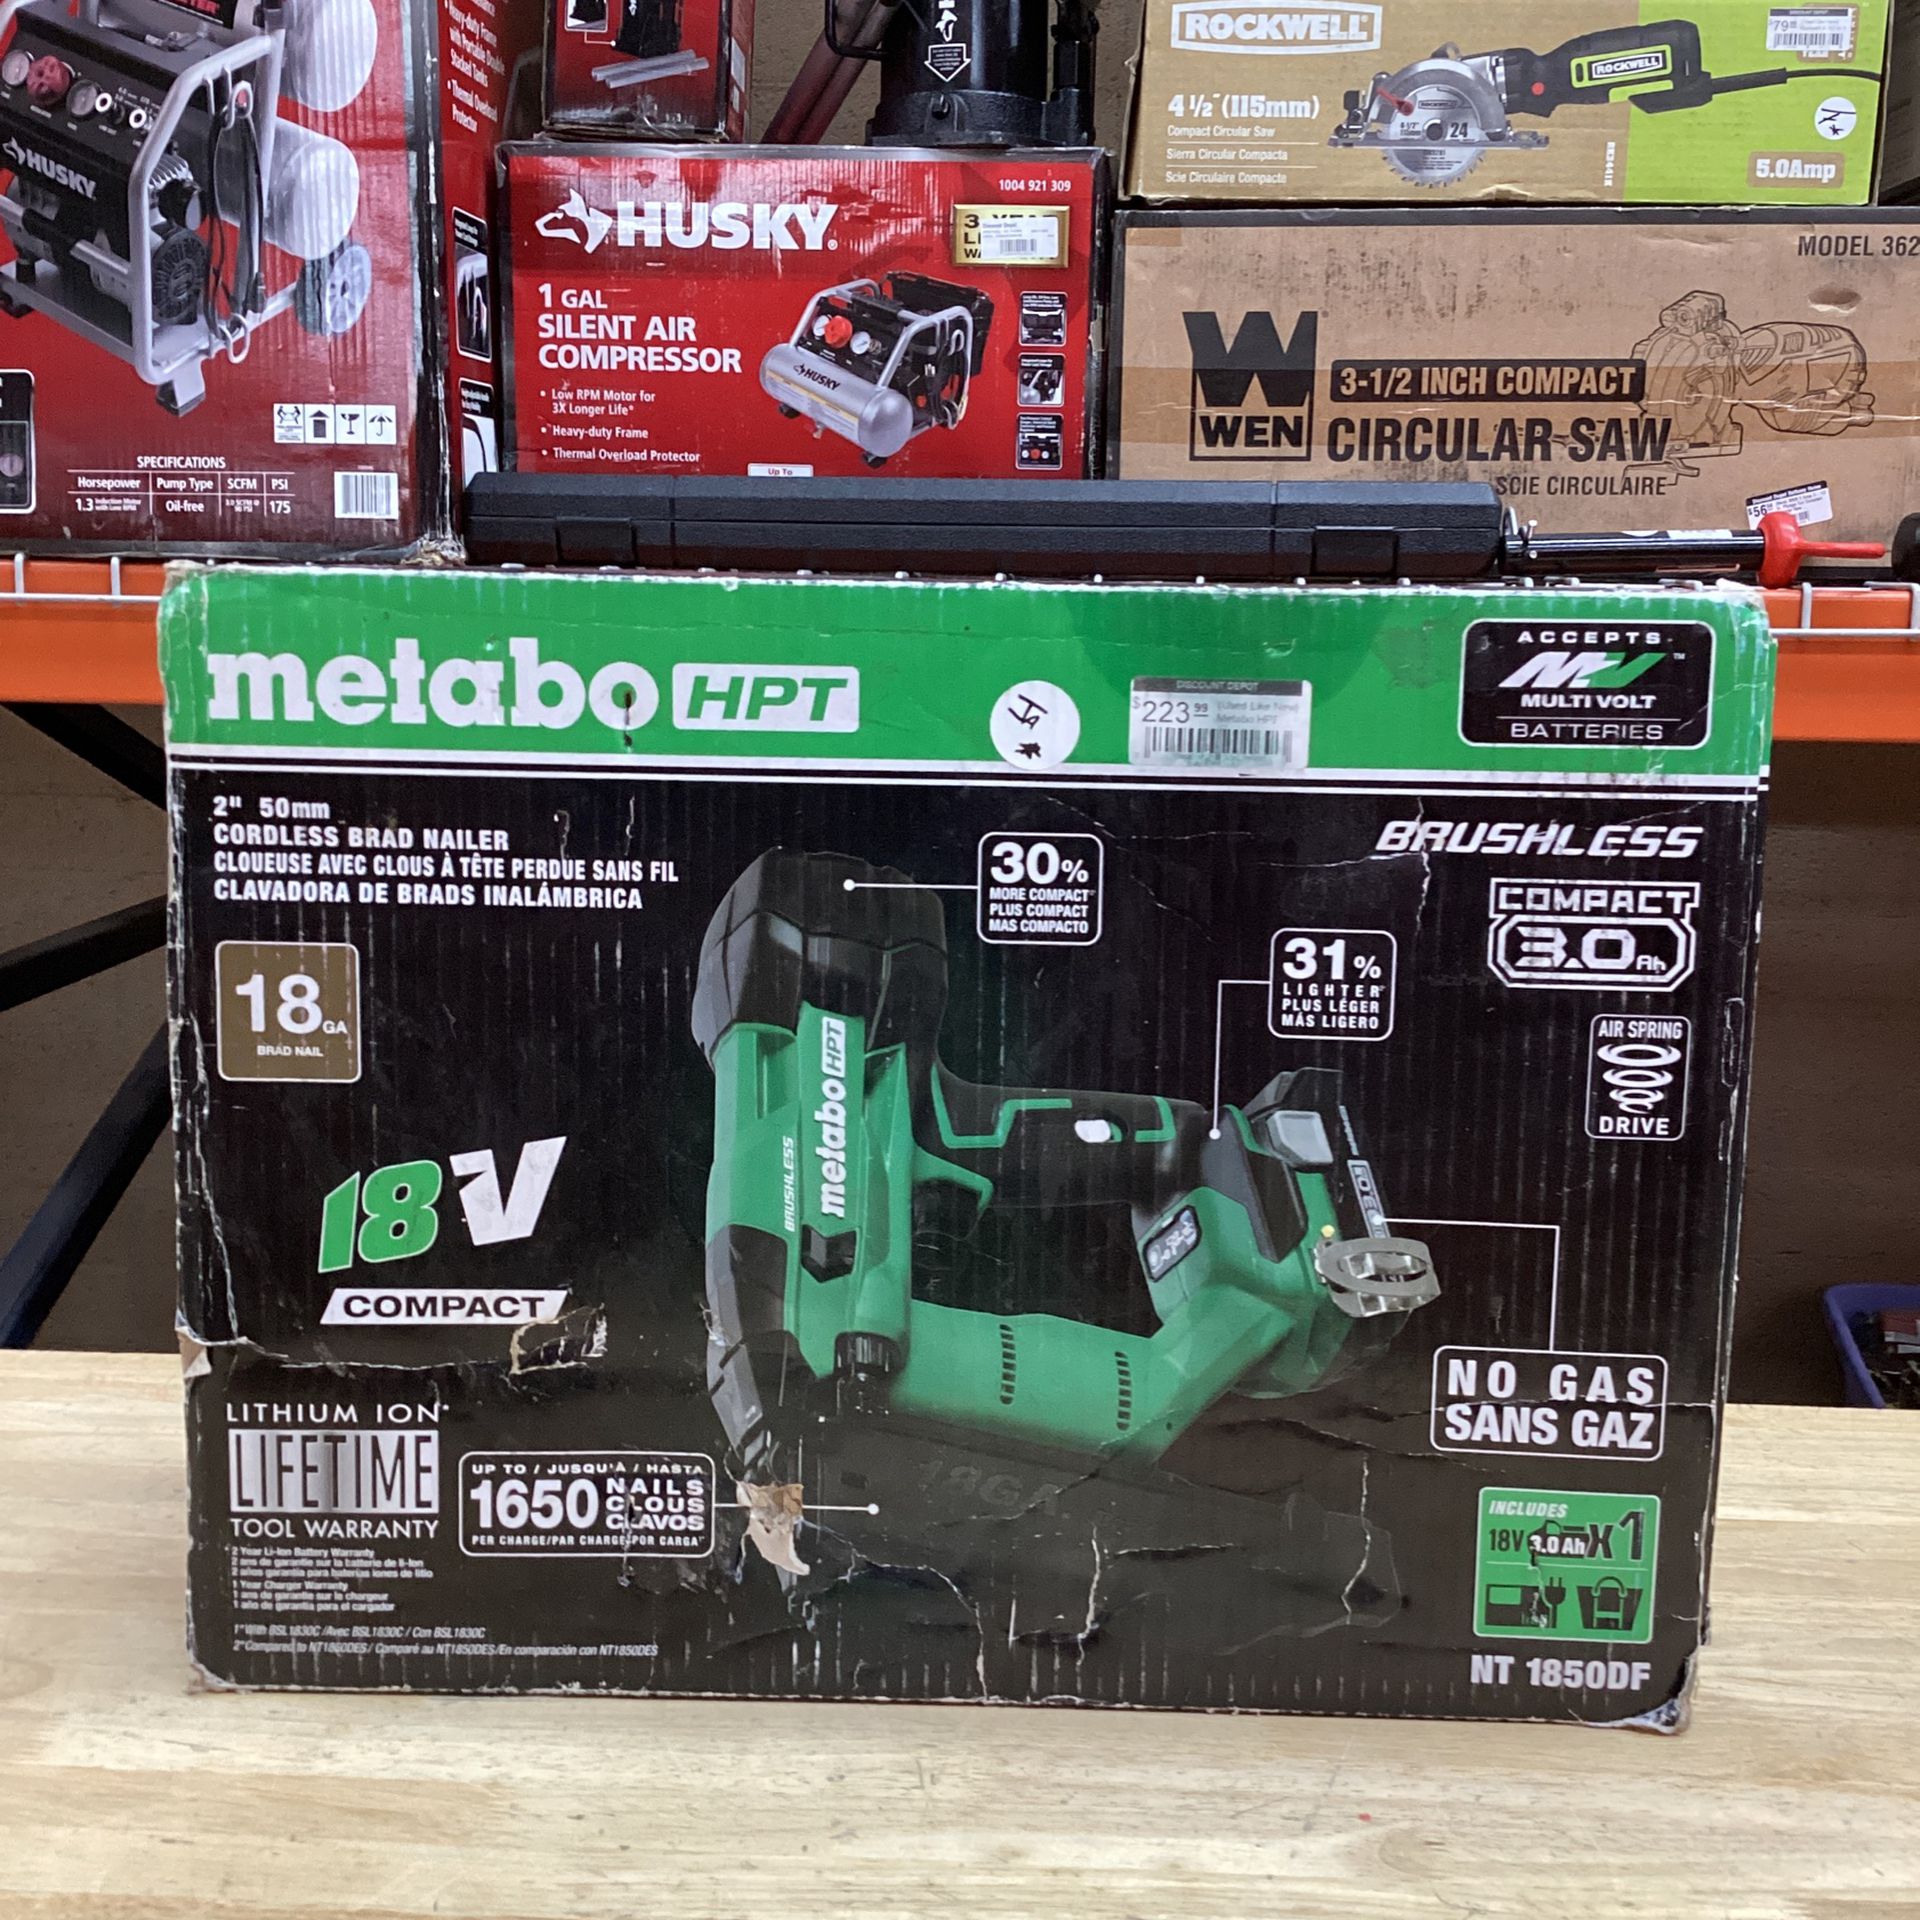 Metabo HPT 18V MultiVolt Cordless Brad Nailer | Includes 1-18V, 3.0 Ah Lithium Ion Battery | Accepts 18 GA 5/8-Inch to 2-Inch Brad Nails | Brushless M